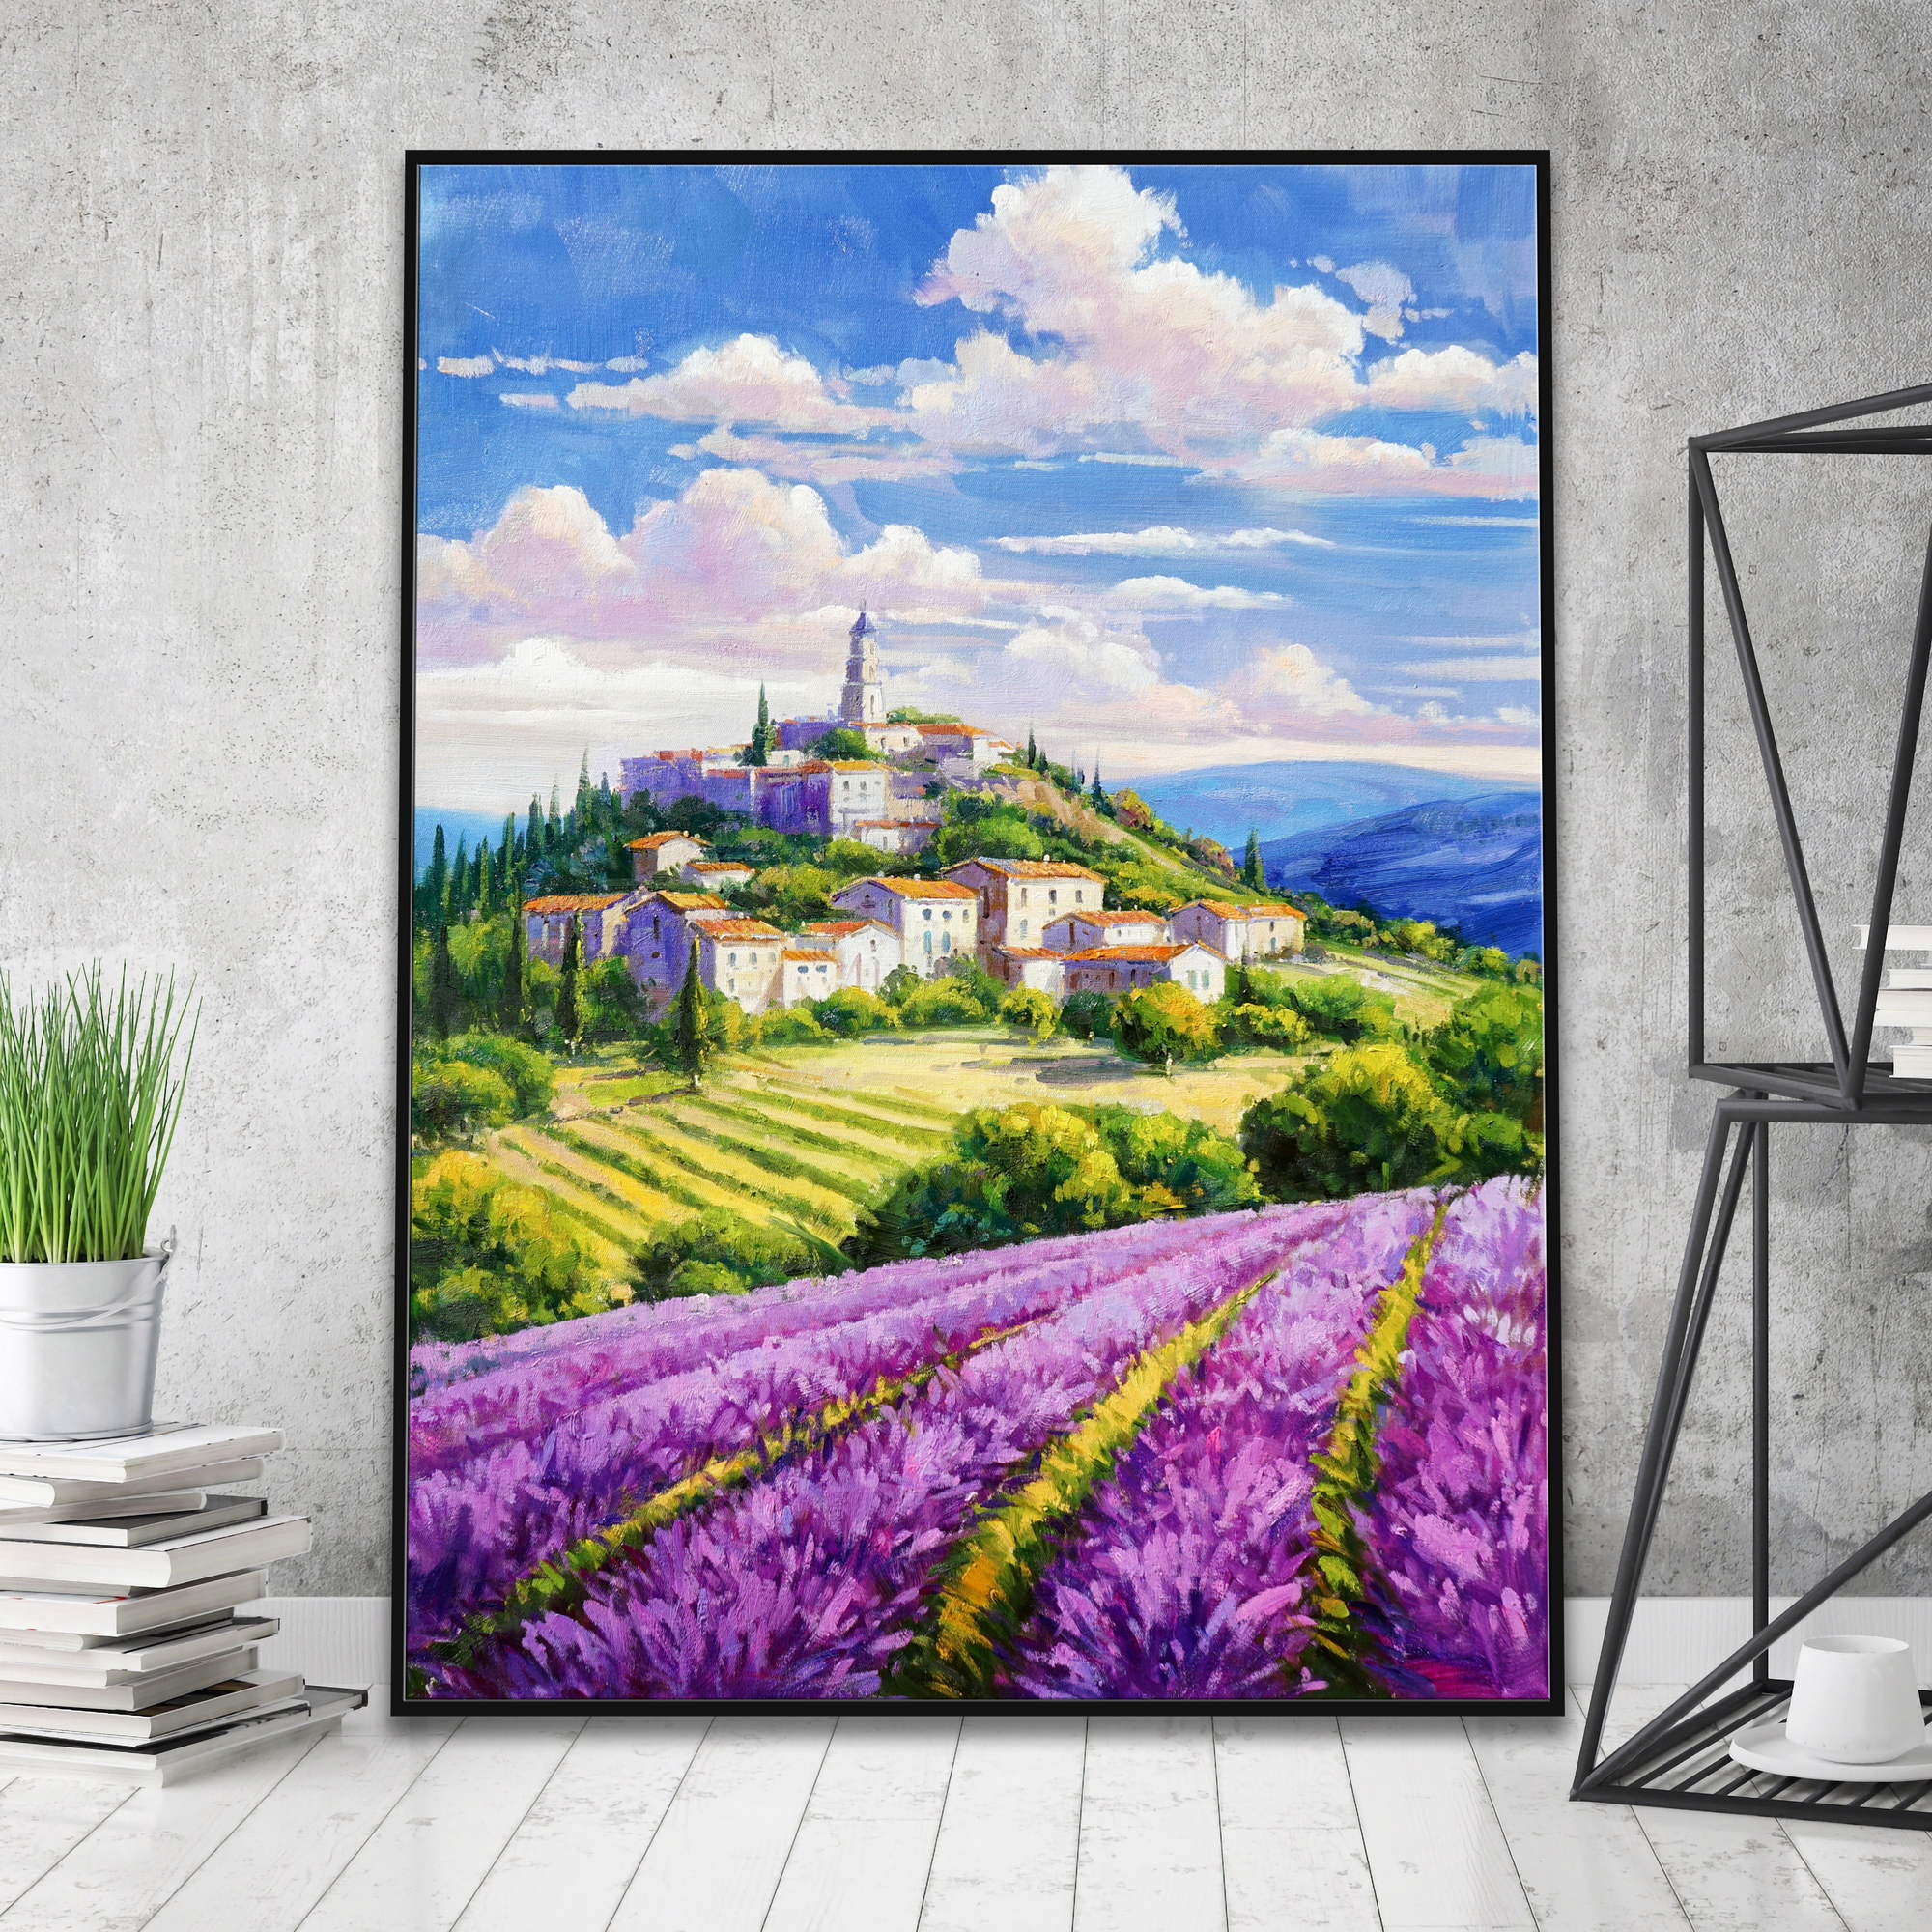 Hand painted Landscape with lavender fields 75x100cm